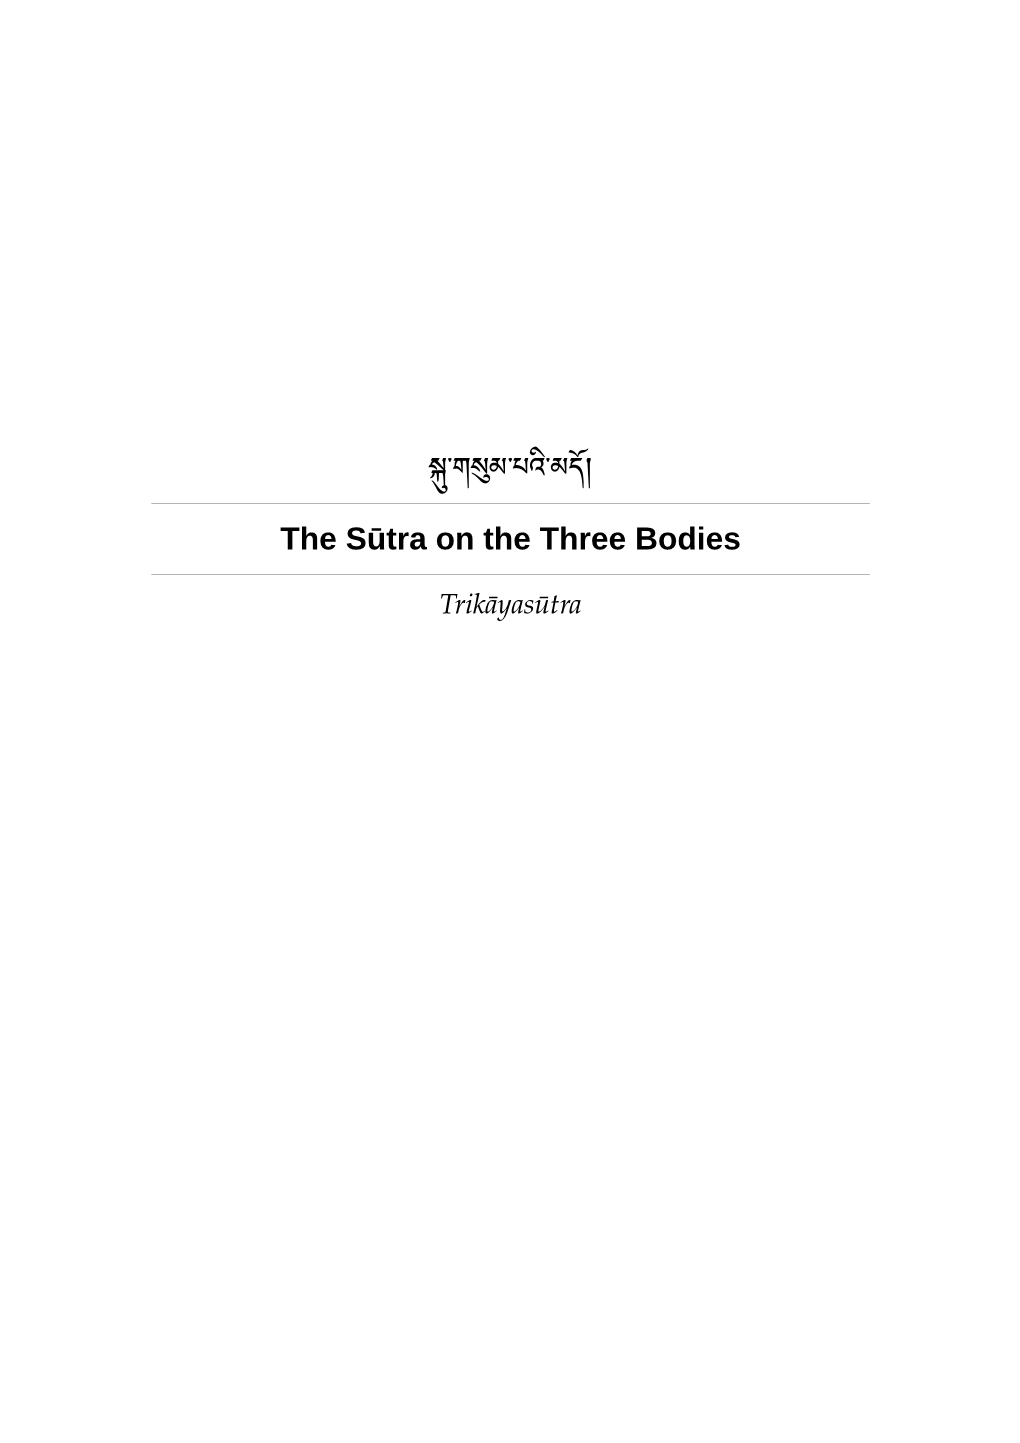 The Sūtra on the Three Bodies